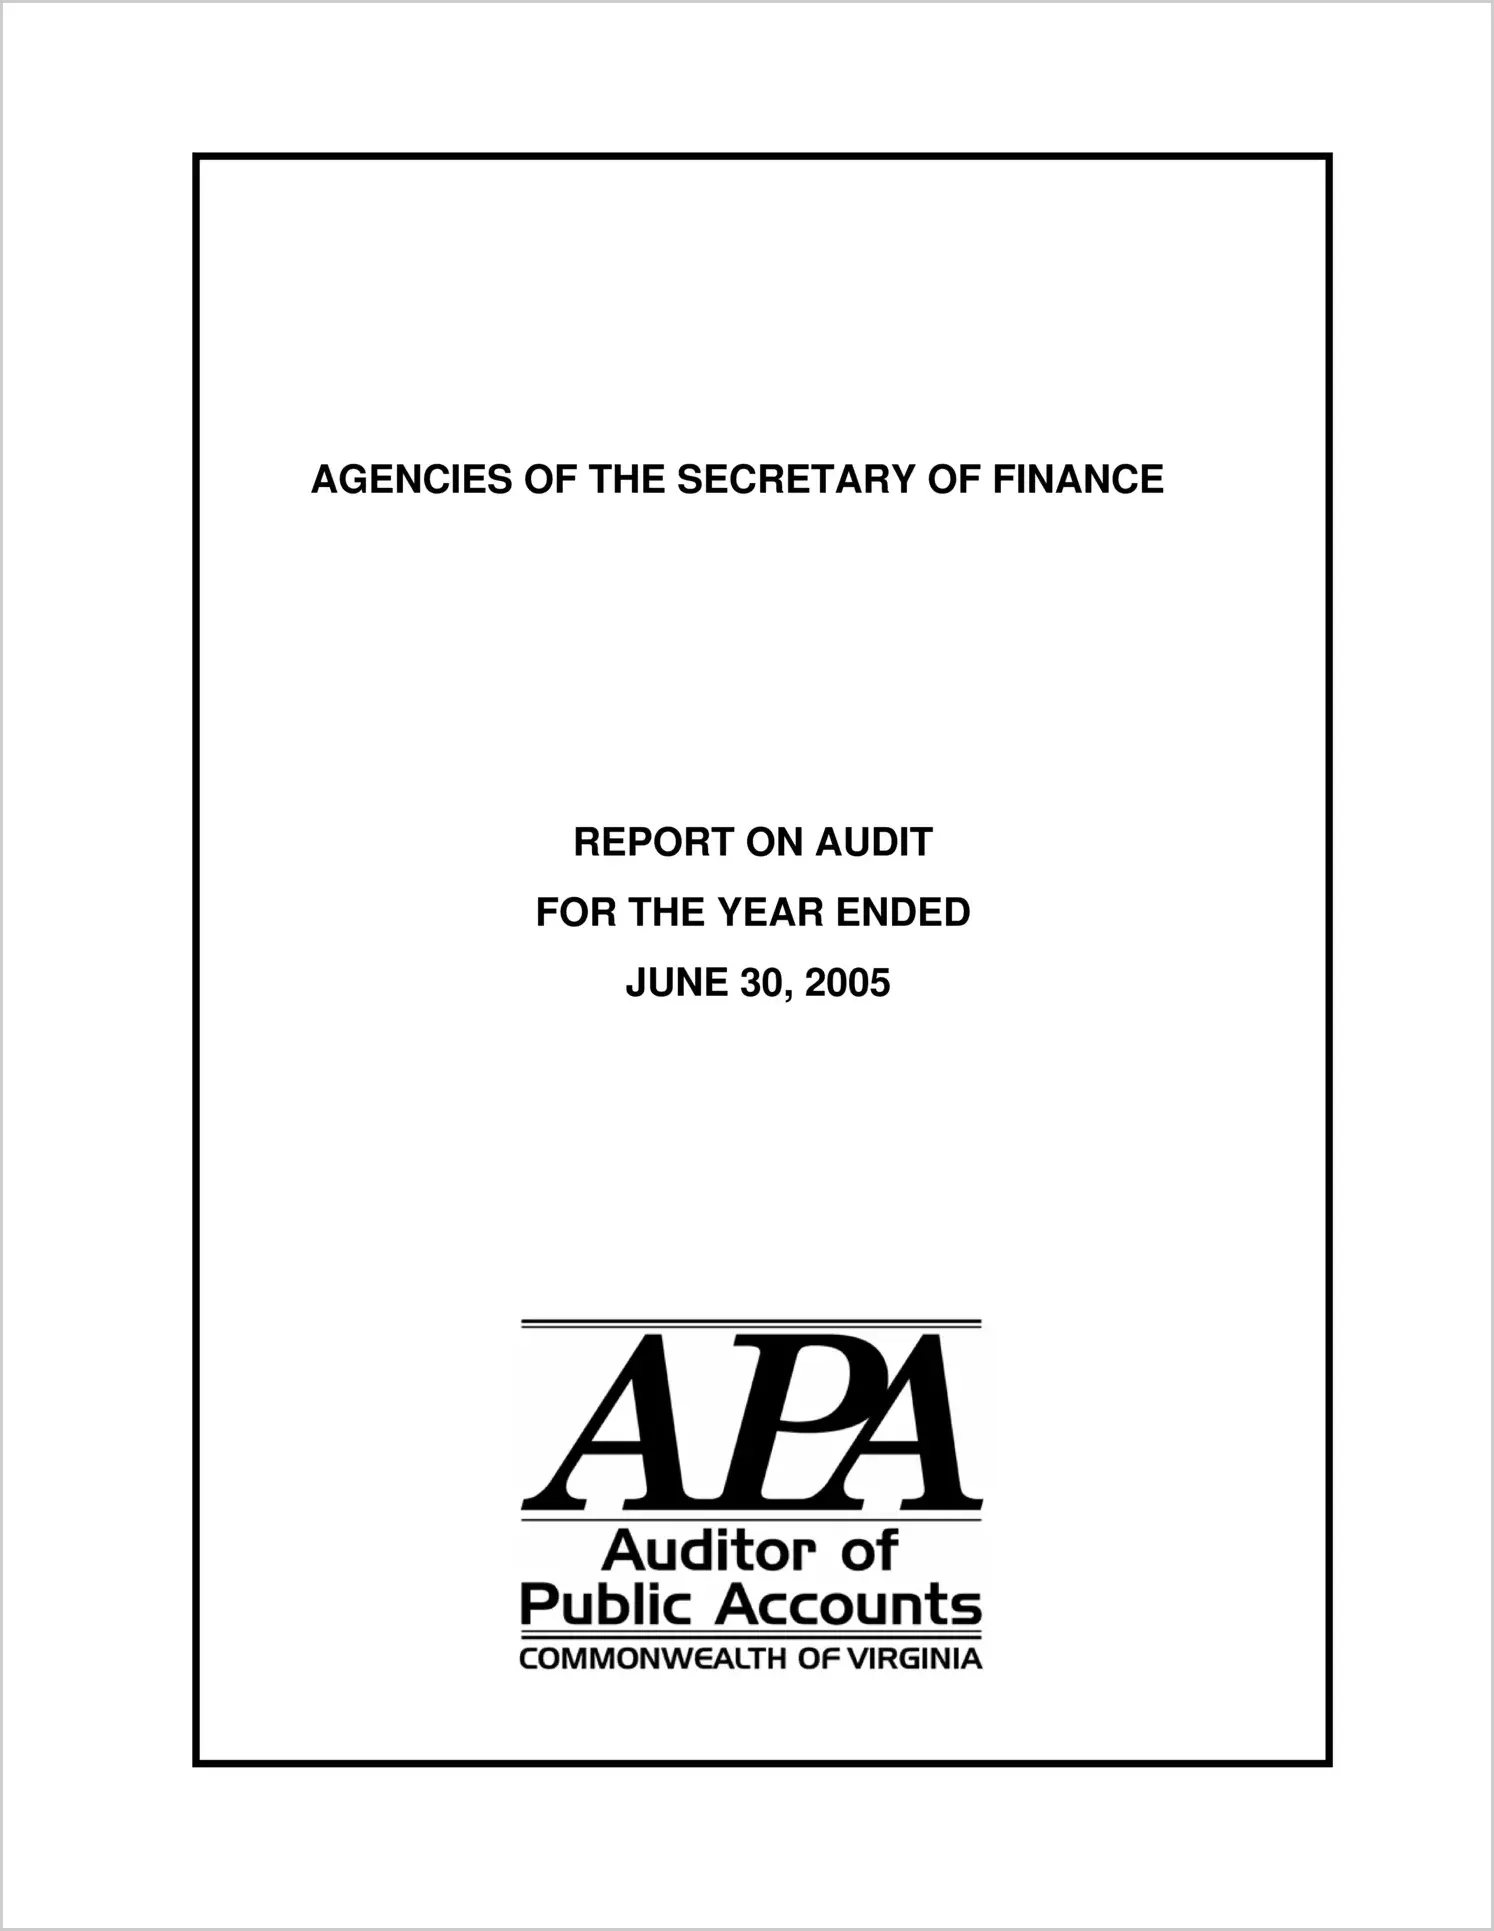 Agencies of the Secretary of Finance for the year ended June 30, 2005